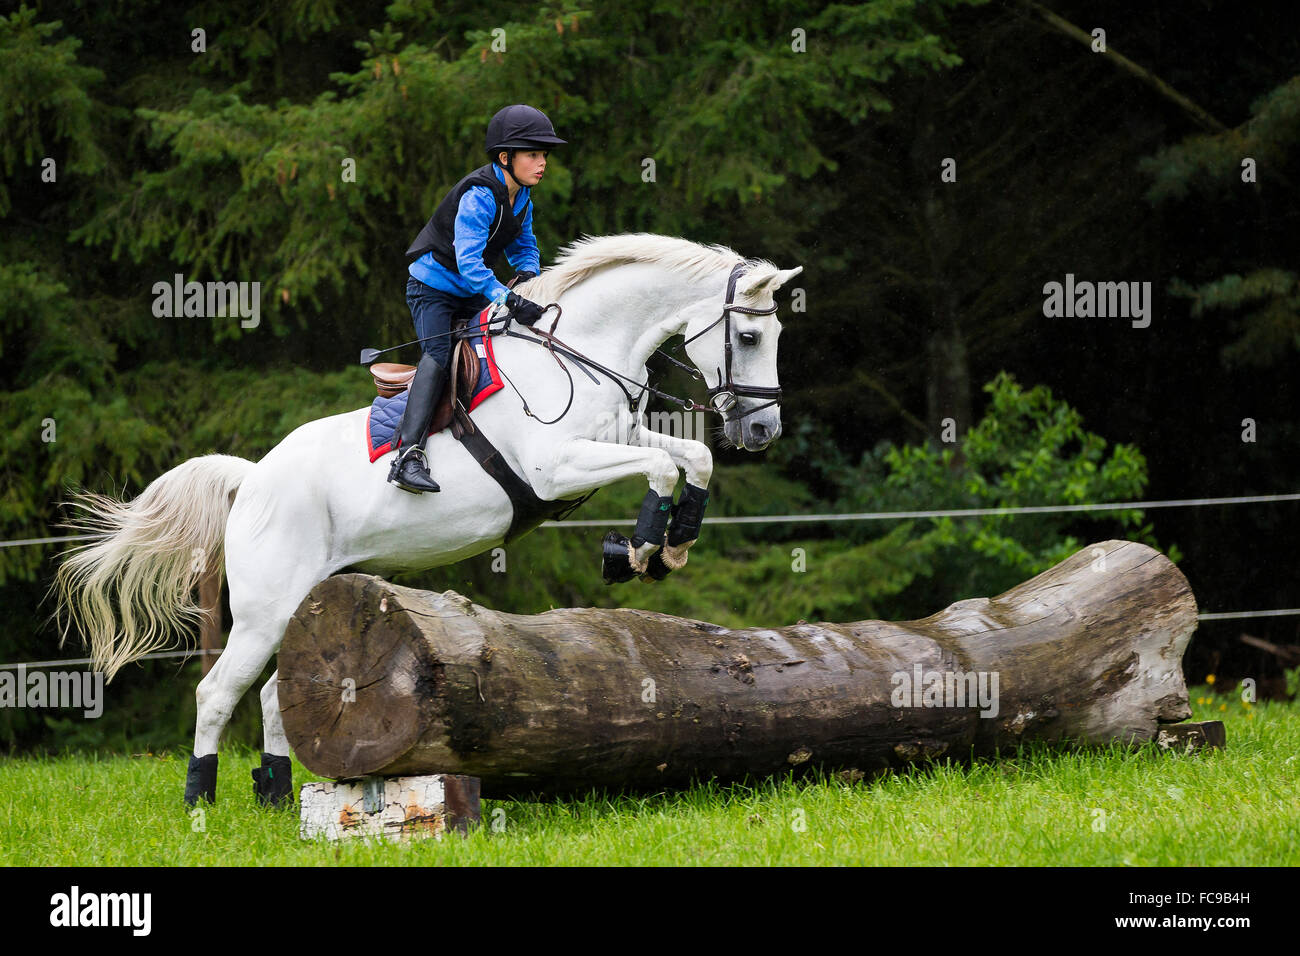 German Riding Pony. Boy on a gray gelding negotiating an obstacle during a cross-country ride. Germany Stock Photo